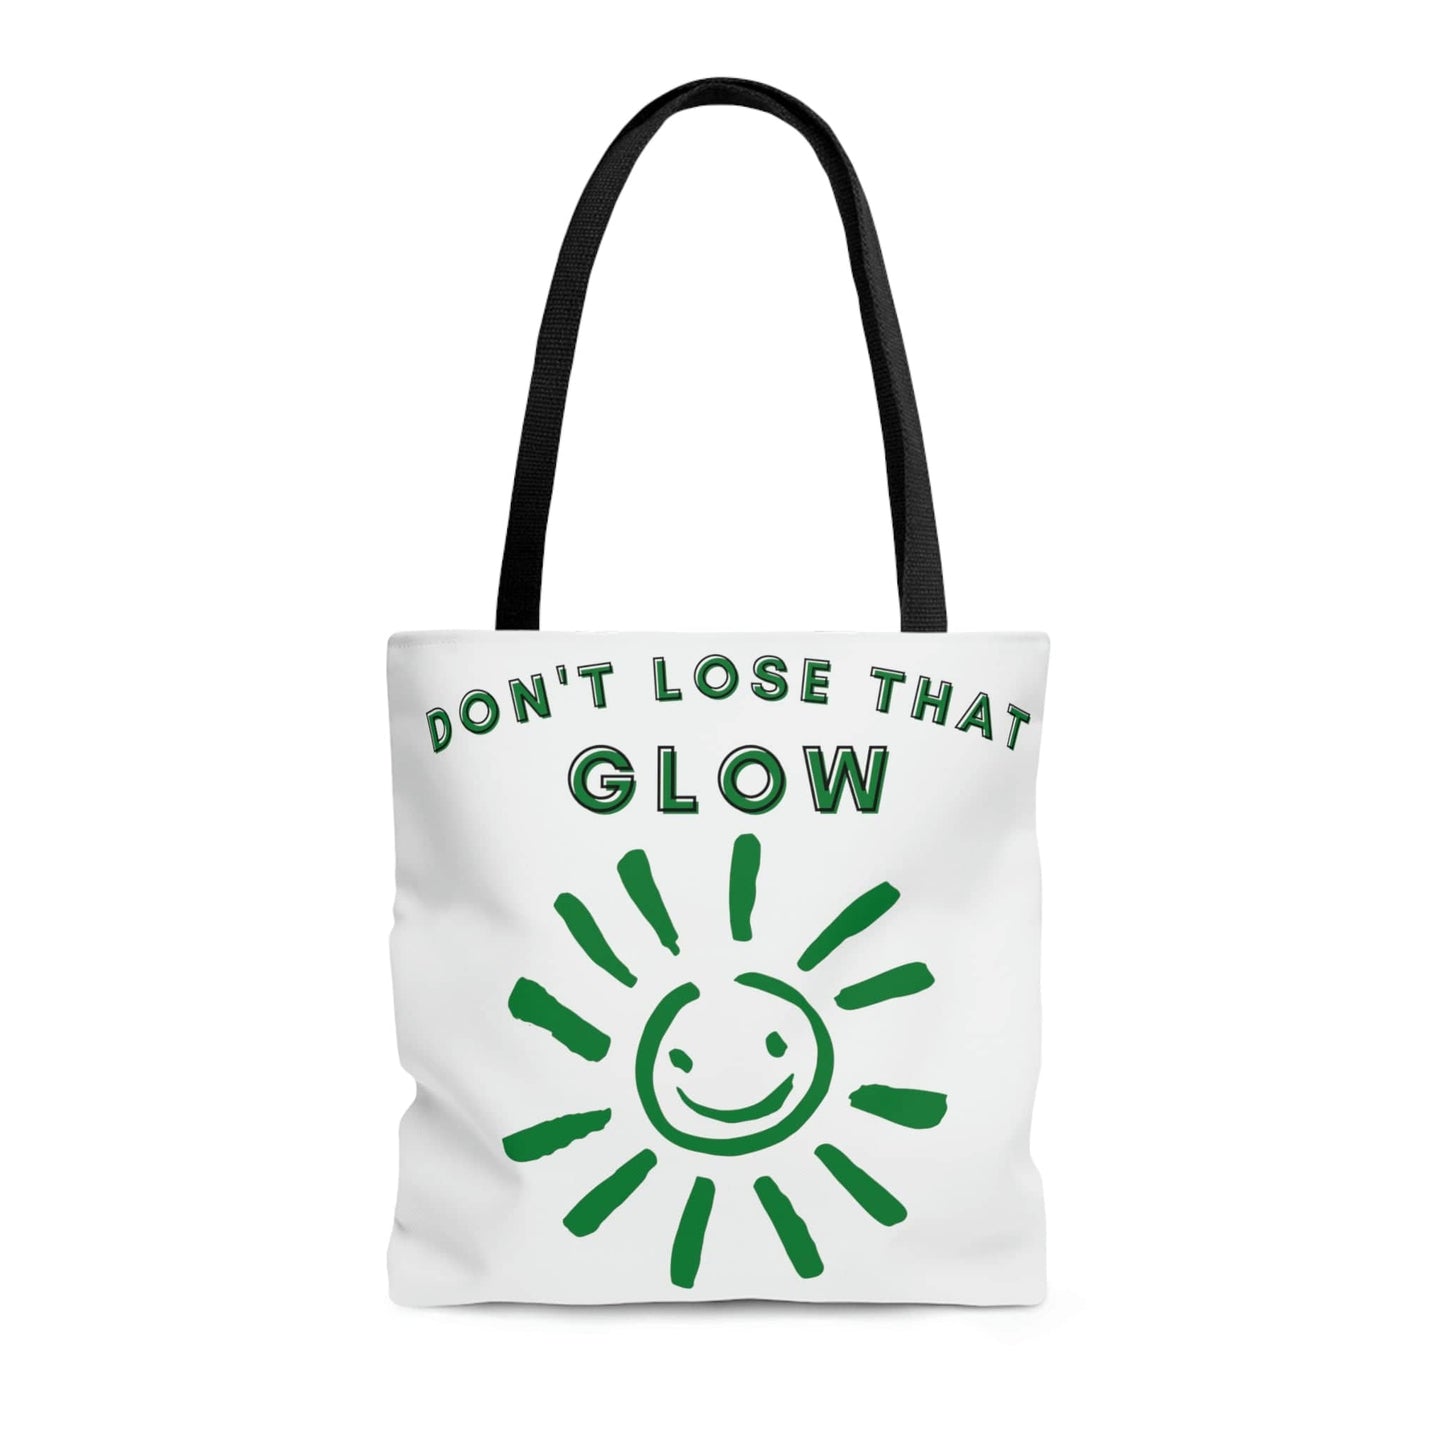 Don't Lose That Glow (Graphic Green Smiling Sun) Tote Bag